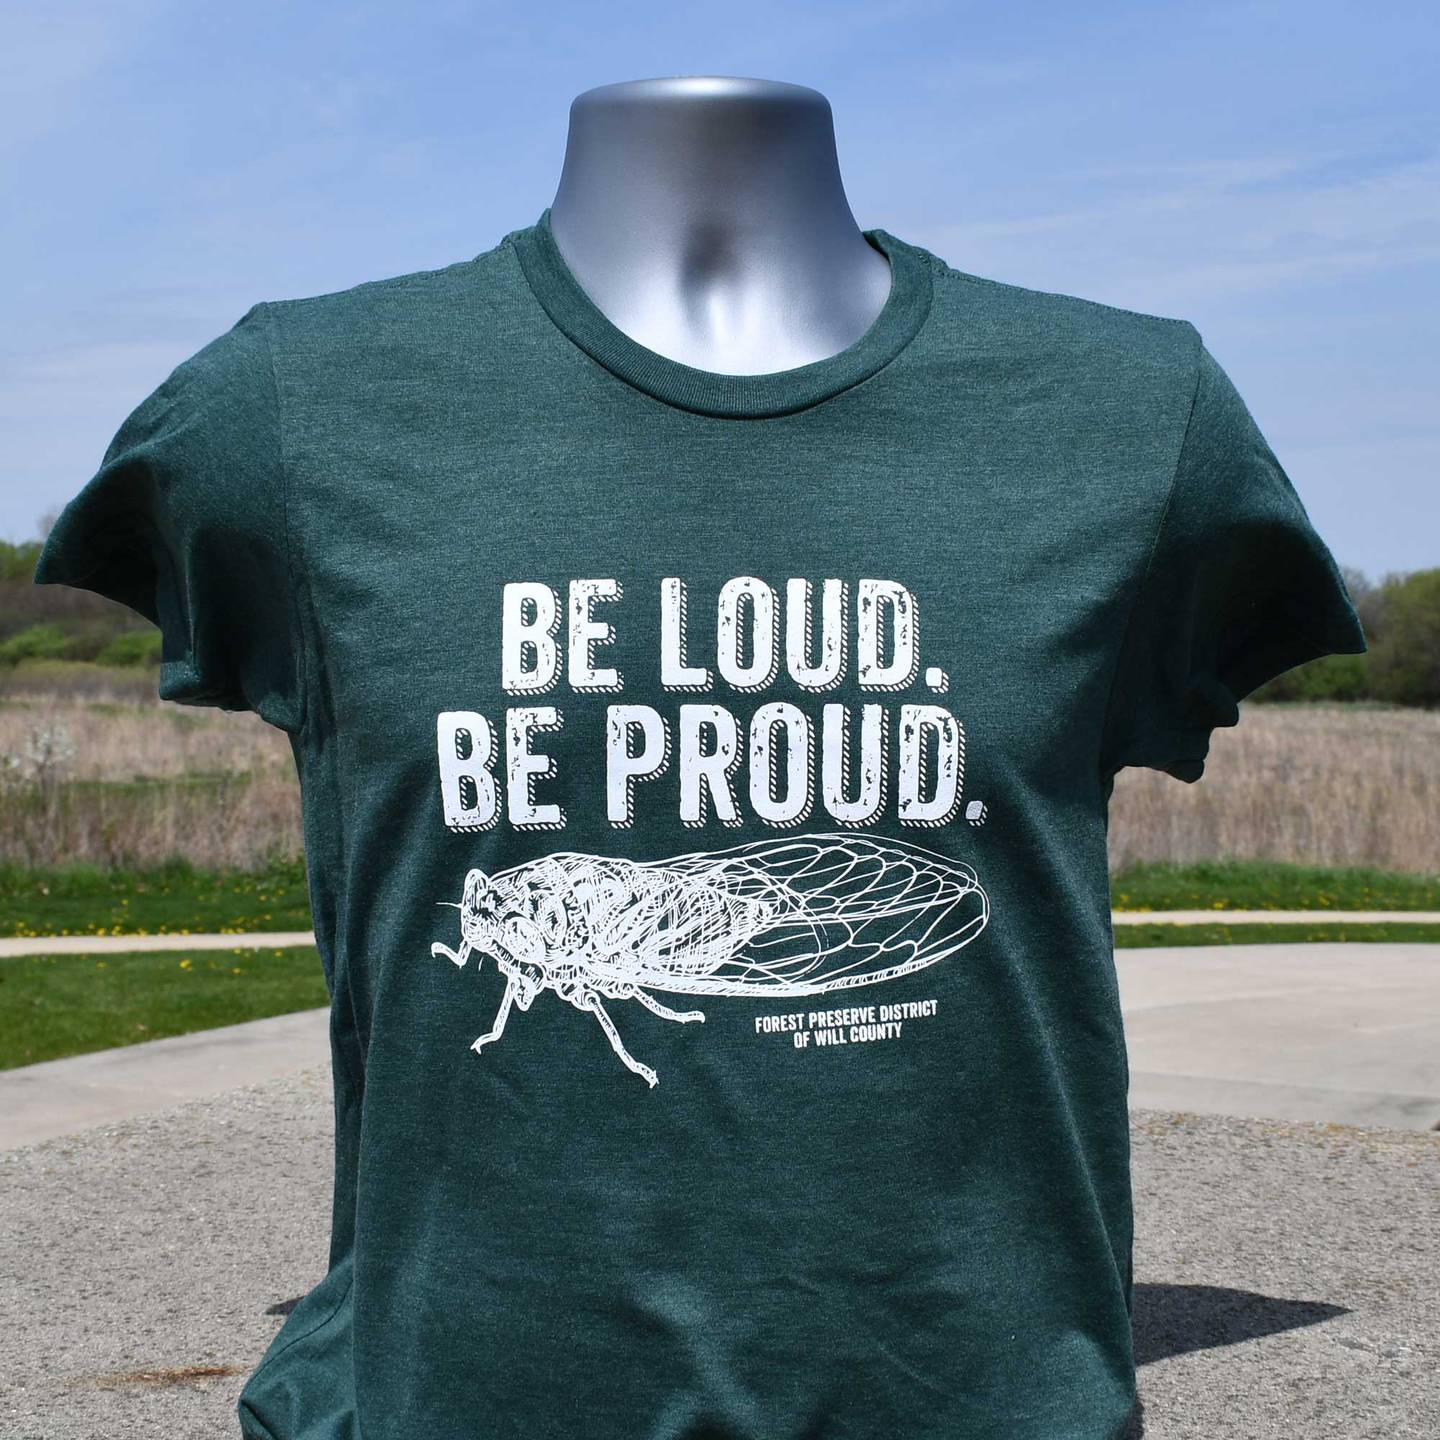 Prepare for the summer of the cicada with a Forest Preserve District of Will County T-shirt, available for purchase at OutsiderThreads.com for $20. Customers will receive 20% off their entire order when they spend at least $50 through Sunday, April 28. All proceeds benefit The Nature Foundation of Will County.